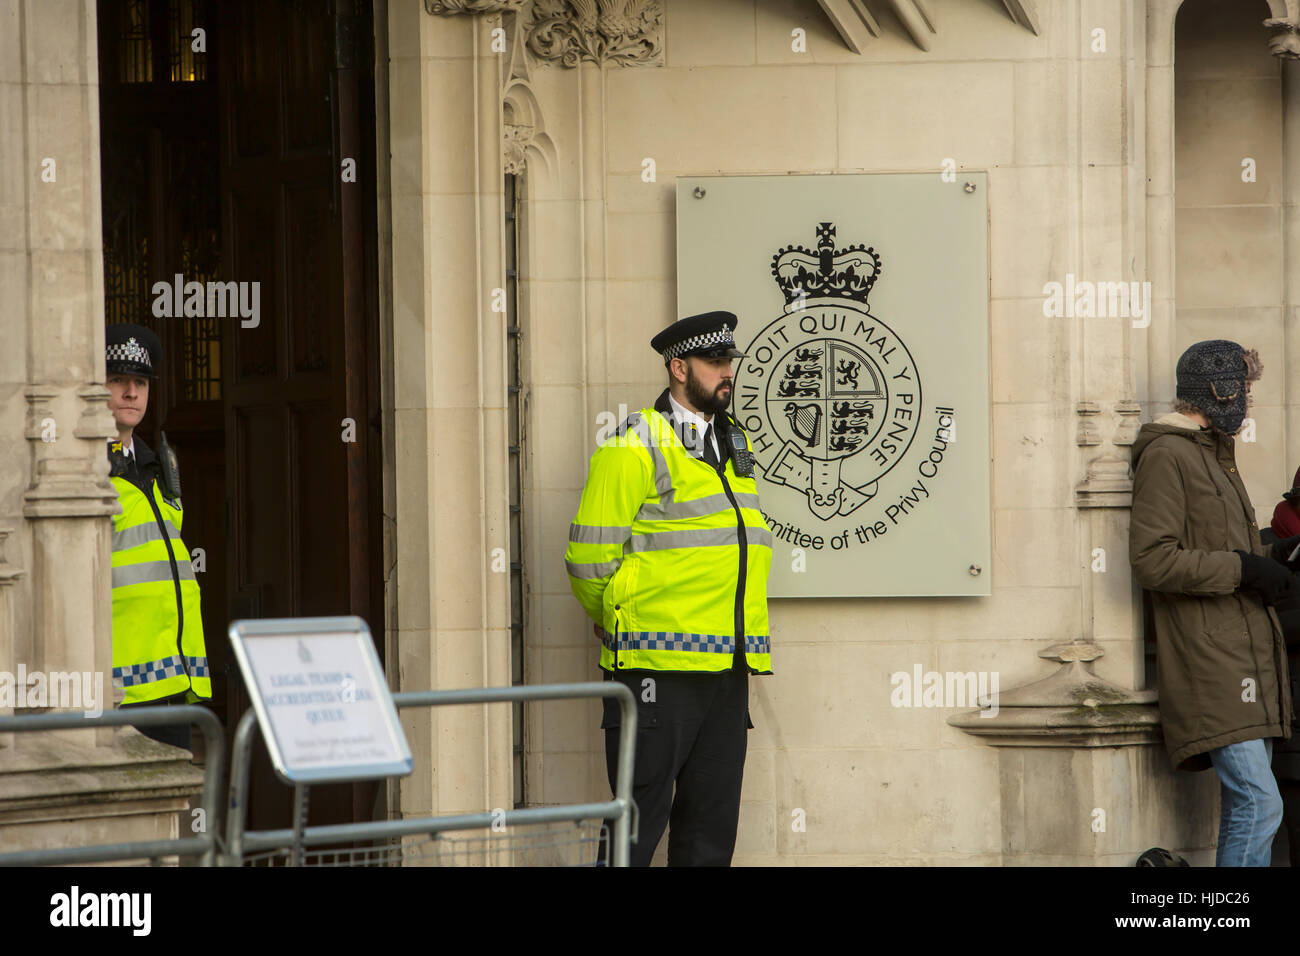 London, UK. 24th Jan, 2017. Verdict of the Supreme Court. The verdict of the Supreme Court was given today. A policeman guards the entrance to the court with its famous symbol. Credit: Jane Campbell/Alamy Live News Stock Photo